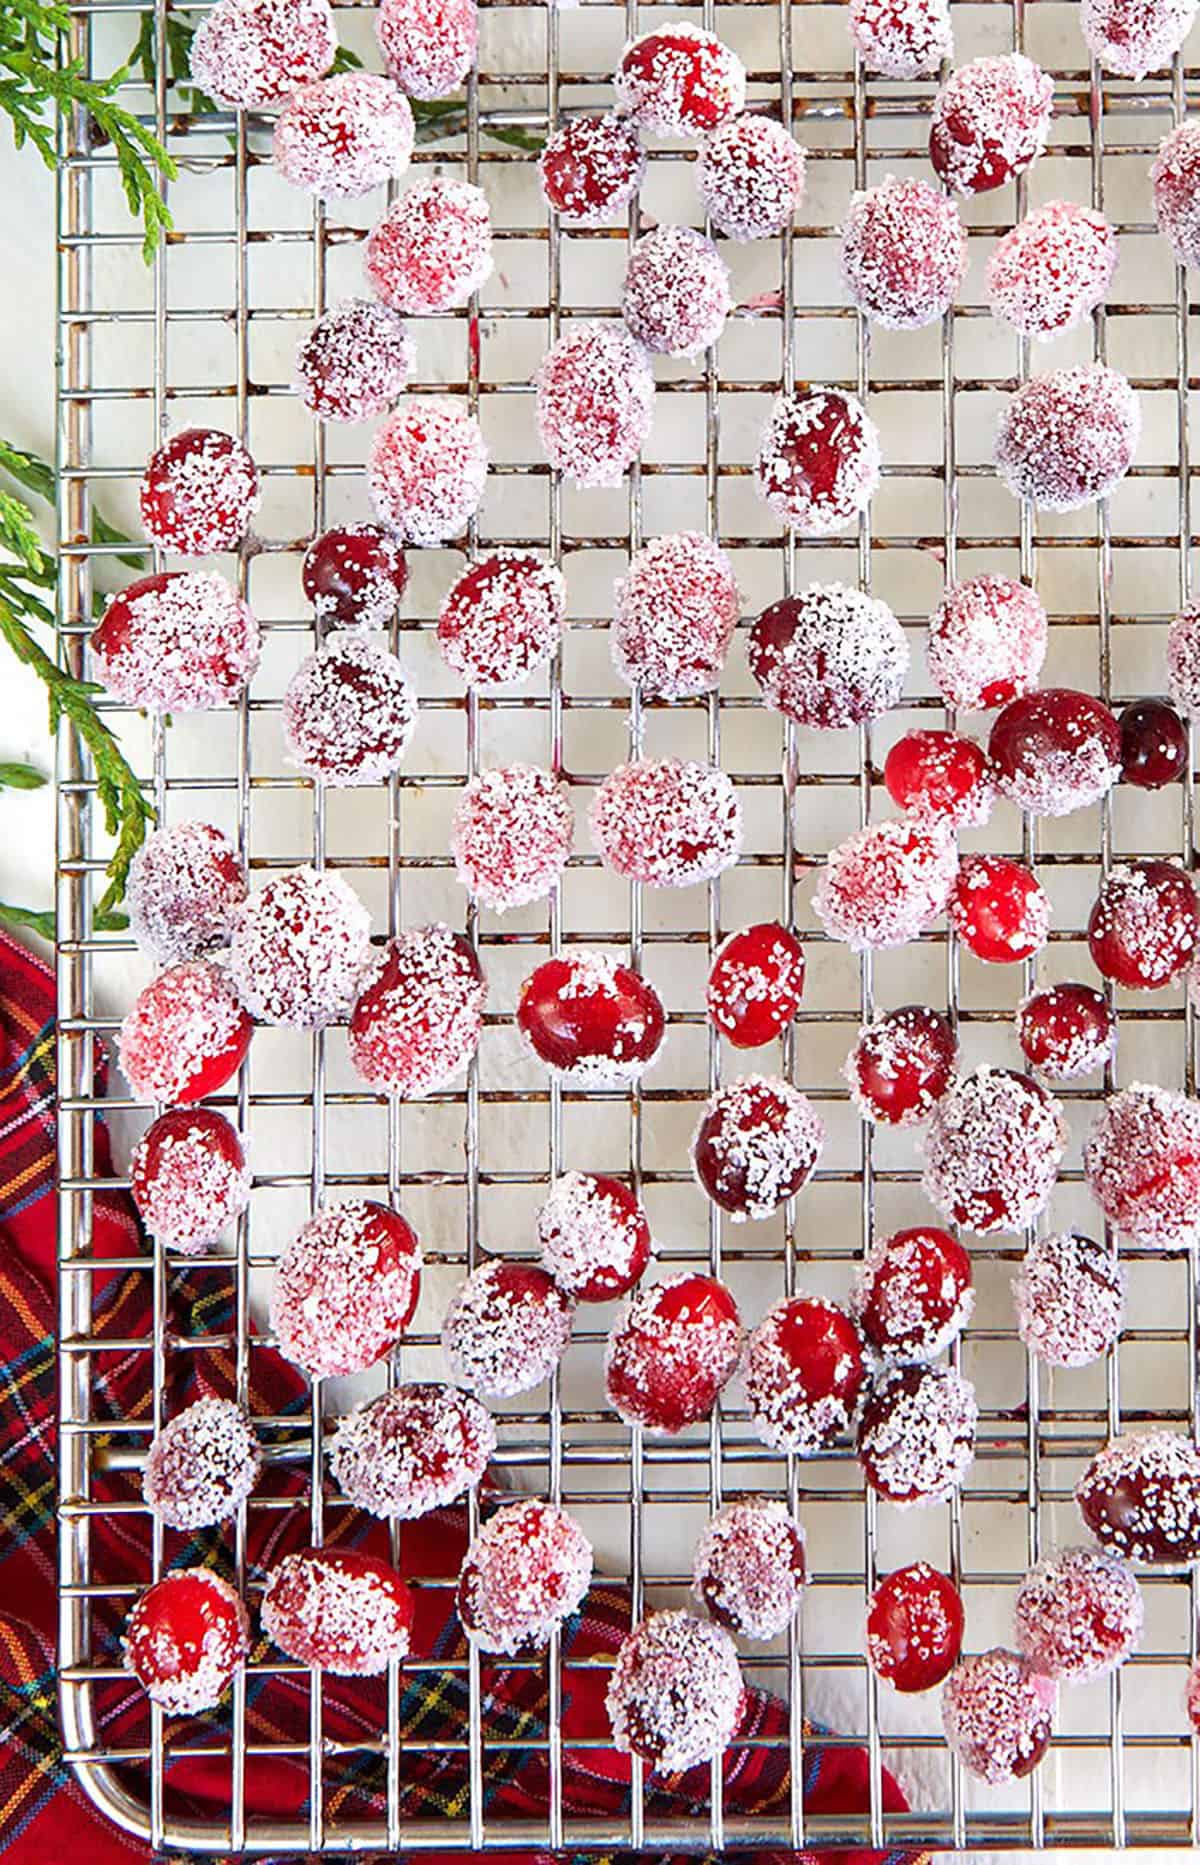 Sugared cranberries on a cooling rack on a white background.